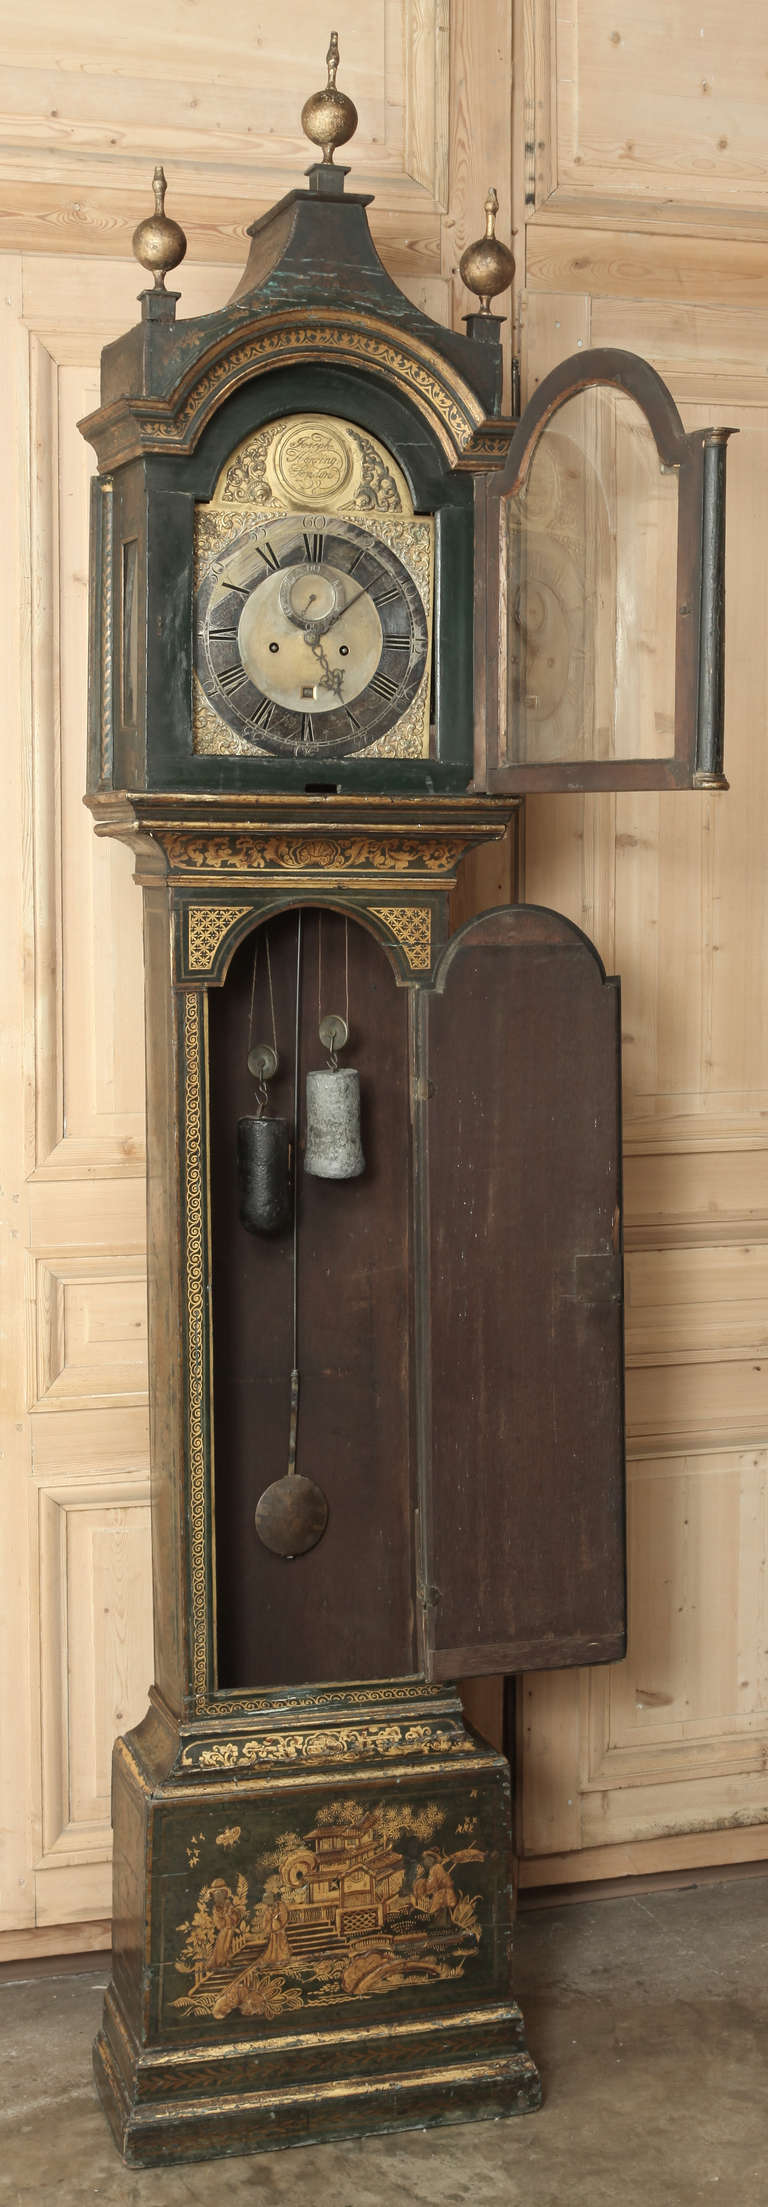 This wonderful 18th century Chinoiserie-Decorated Long Case Clock by Joseph Herring of London features the hood with pagoda top with turned ball finials, the trunk fitted a long trunk door with arch topped door, a case with gold Chinoiserie